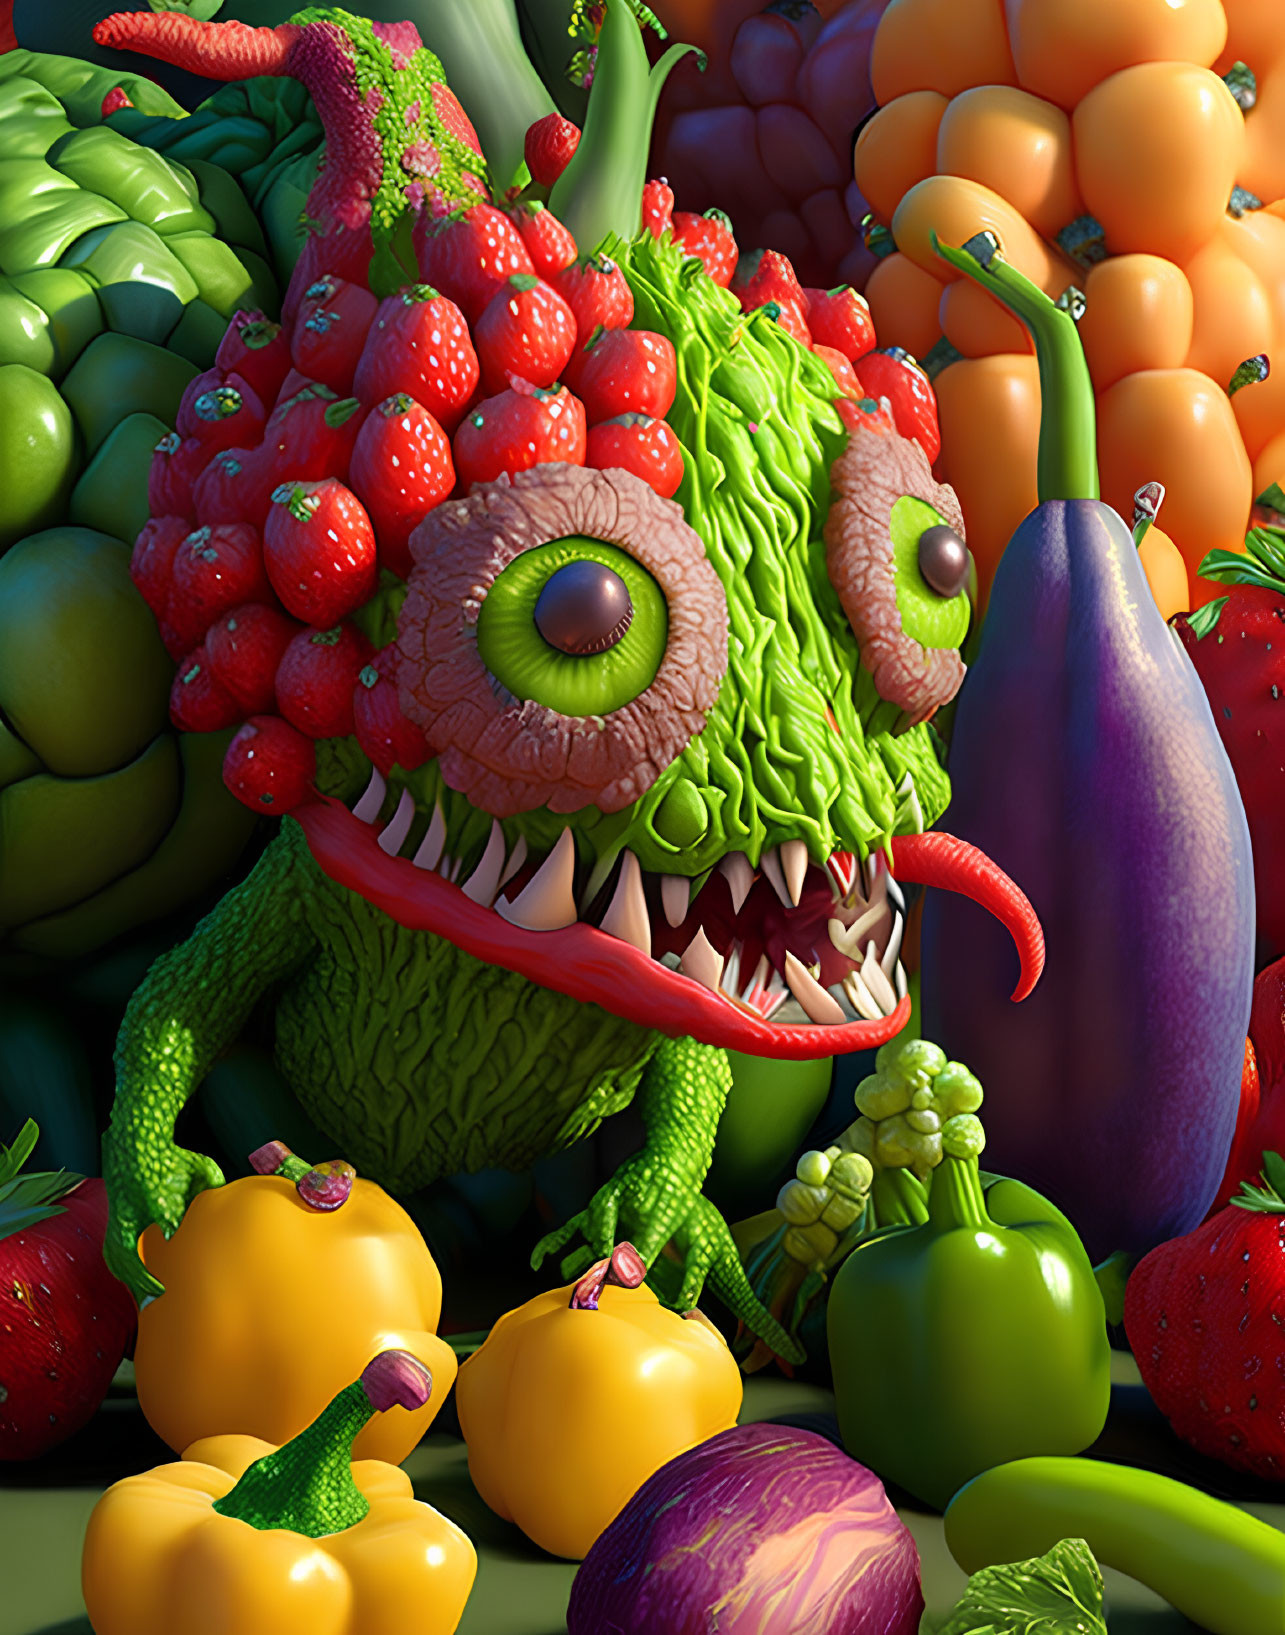 Vibrant creature with fruit and vegetable features in produce setting